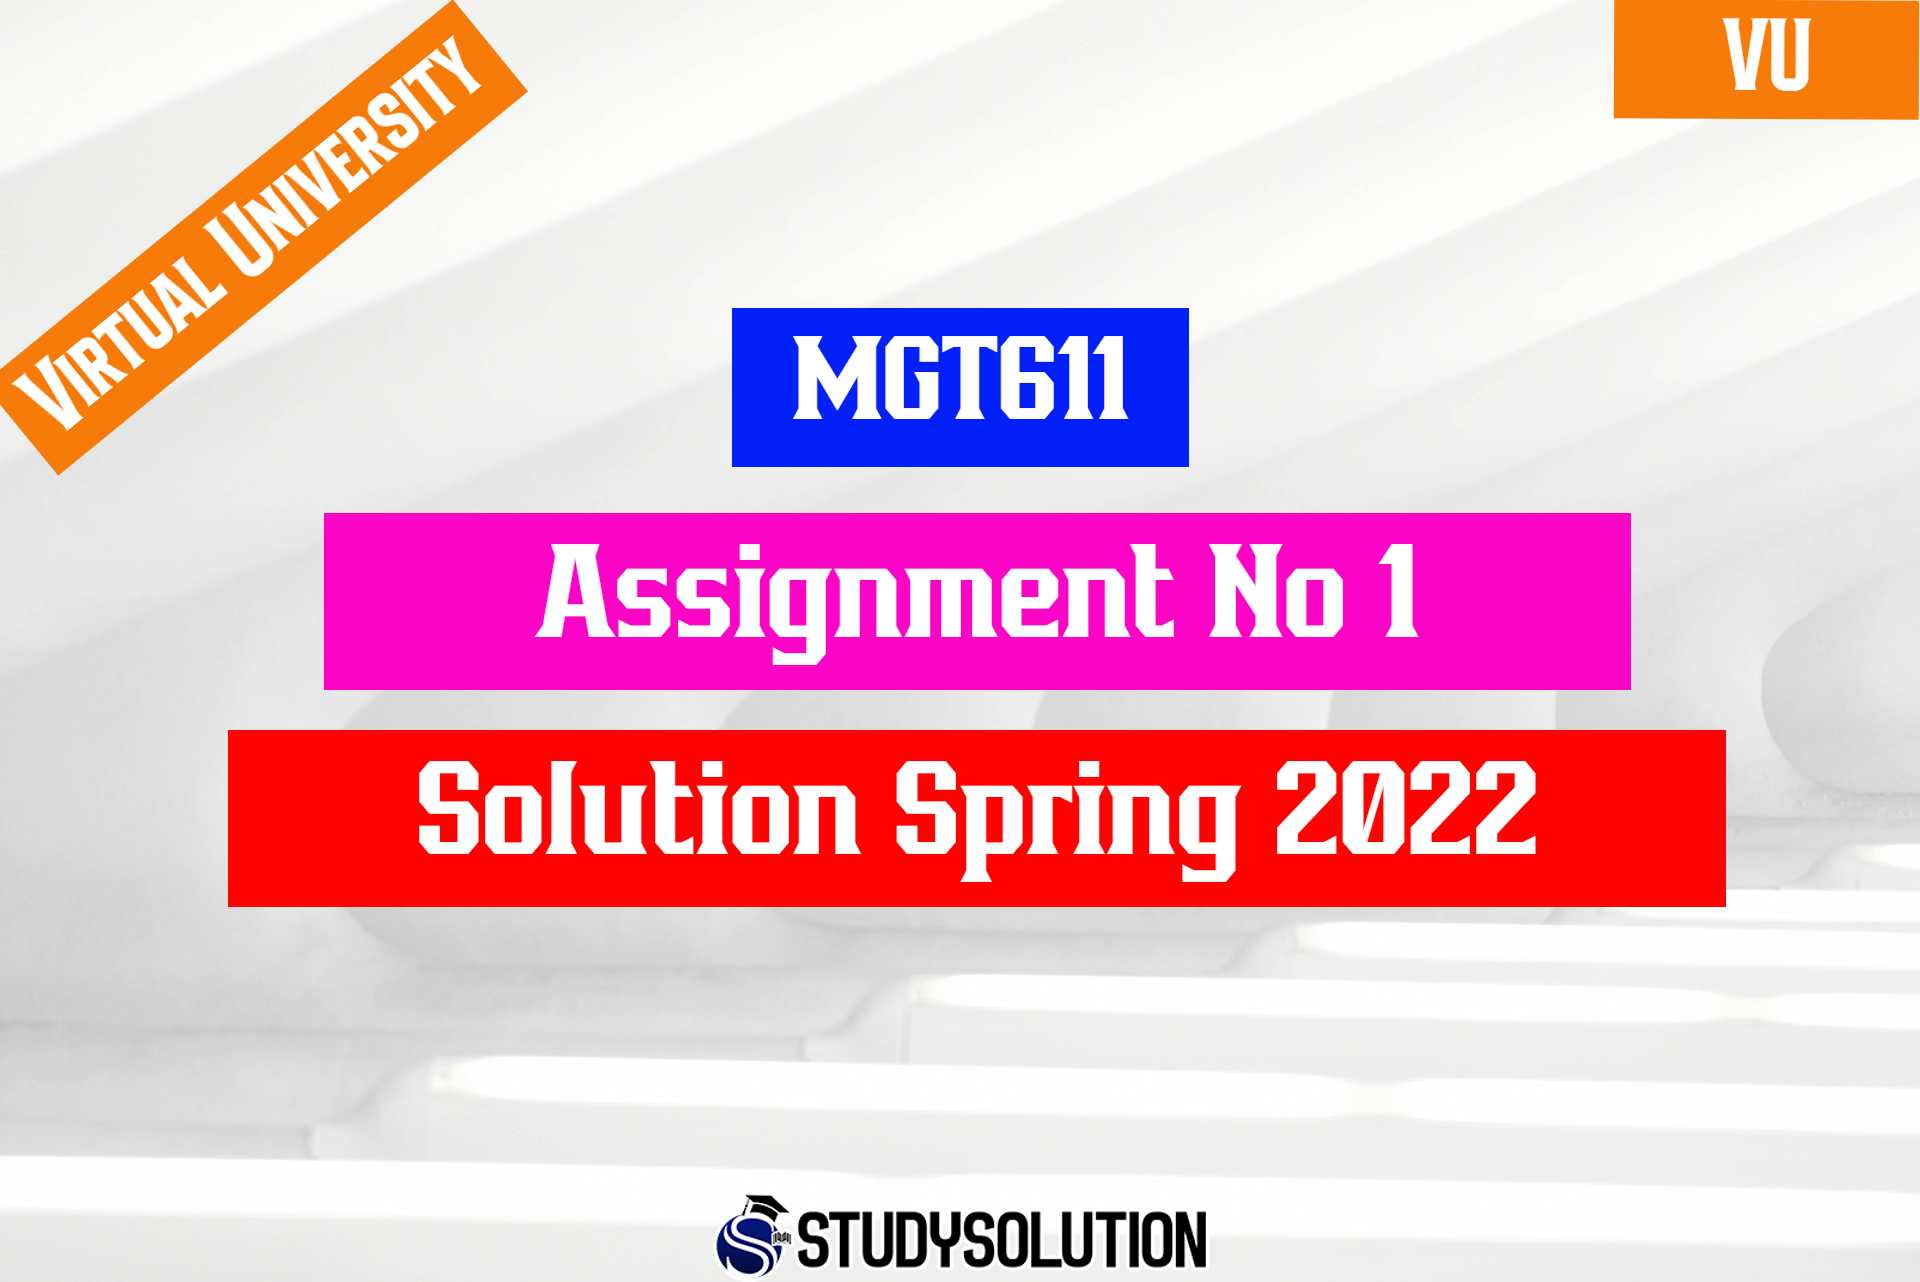 MGT611 Assignment No1 Solution Spring 2022